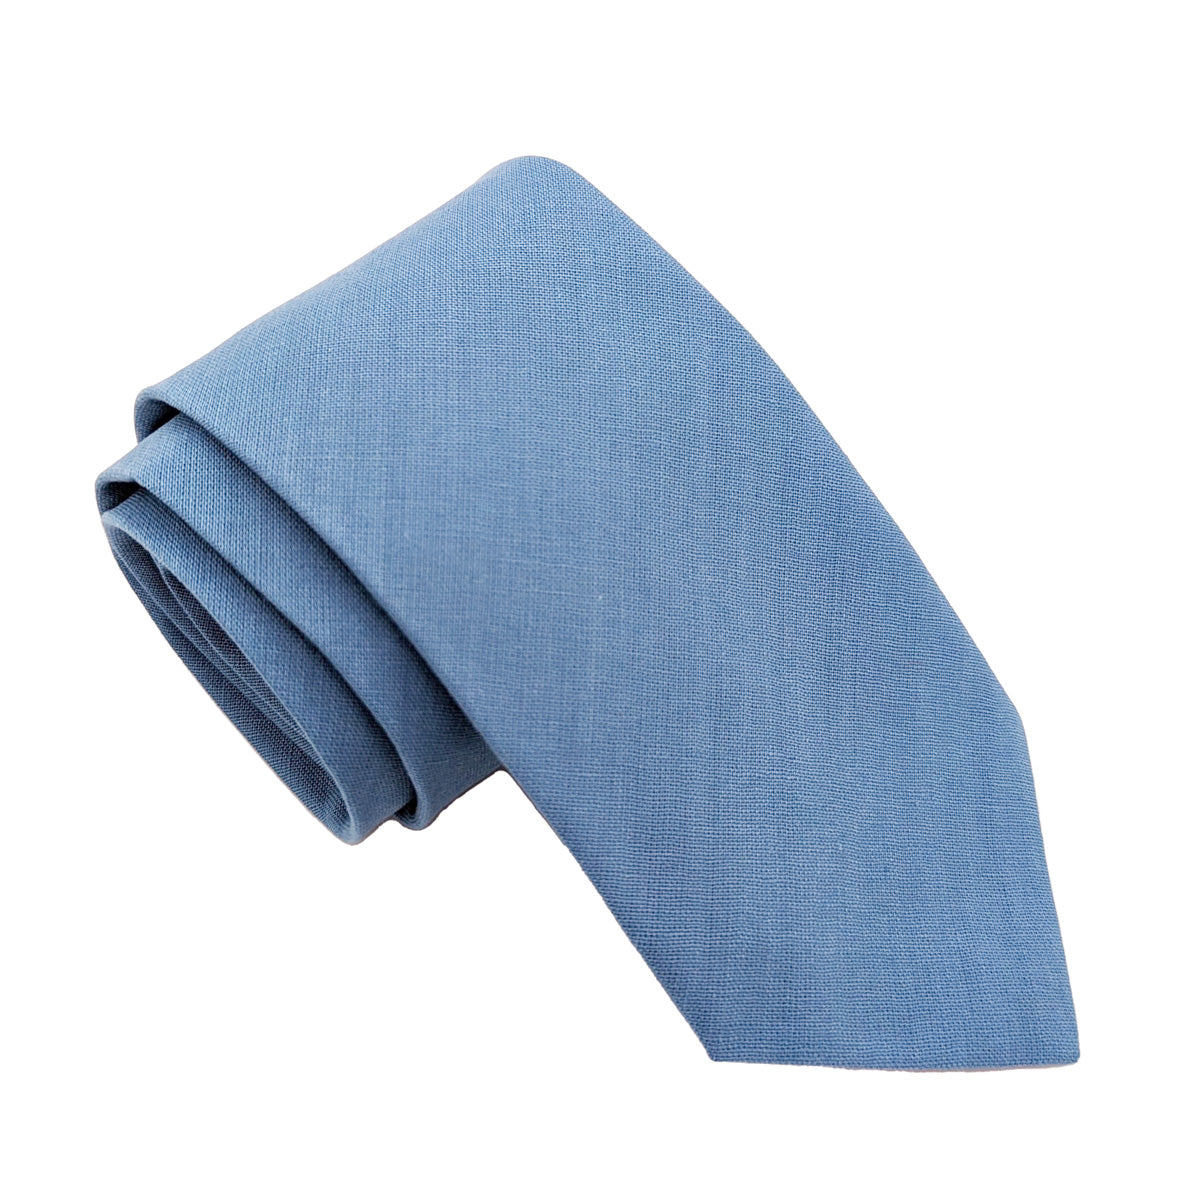 Mineral Blue Cotton Boys Ties